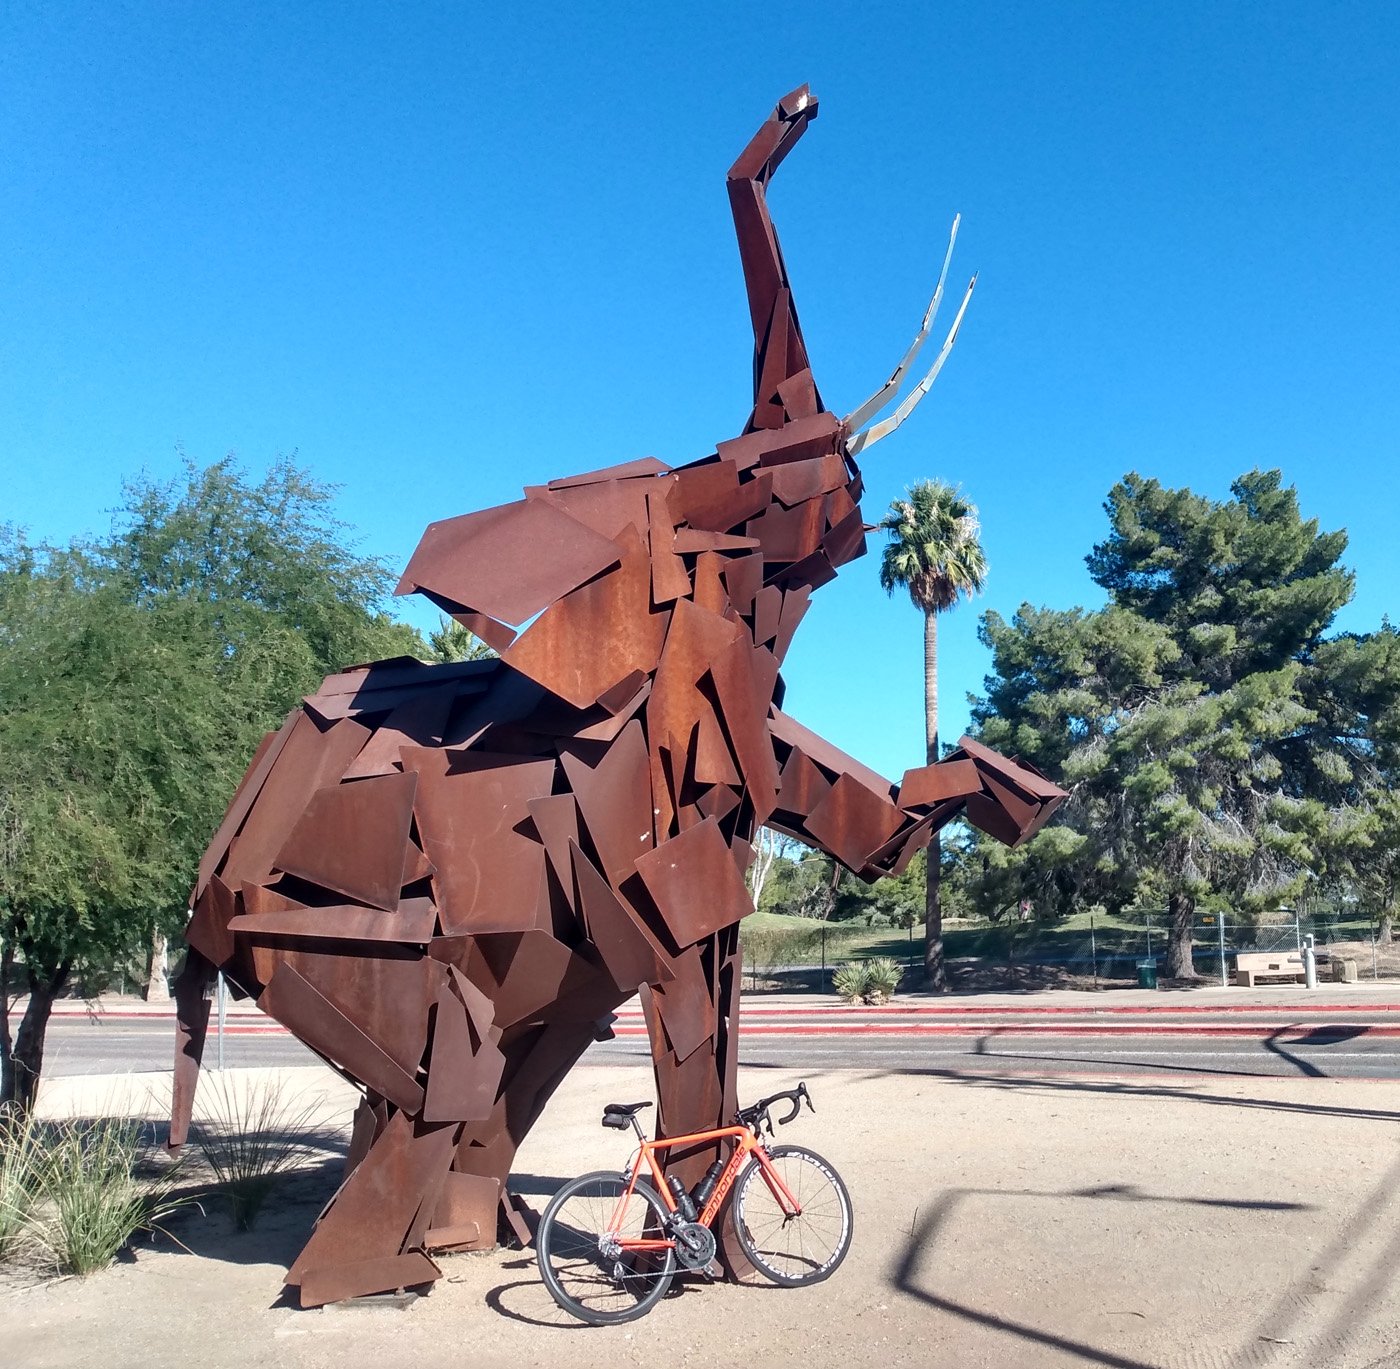 Big chonky rust elephant in front of the Tuscon Zoo entrance.